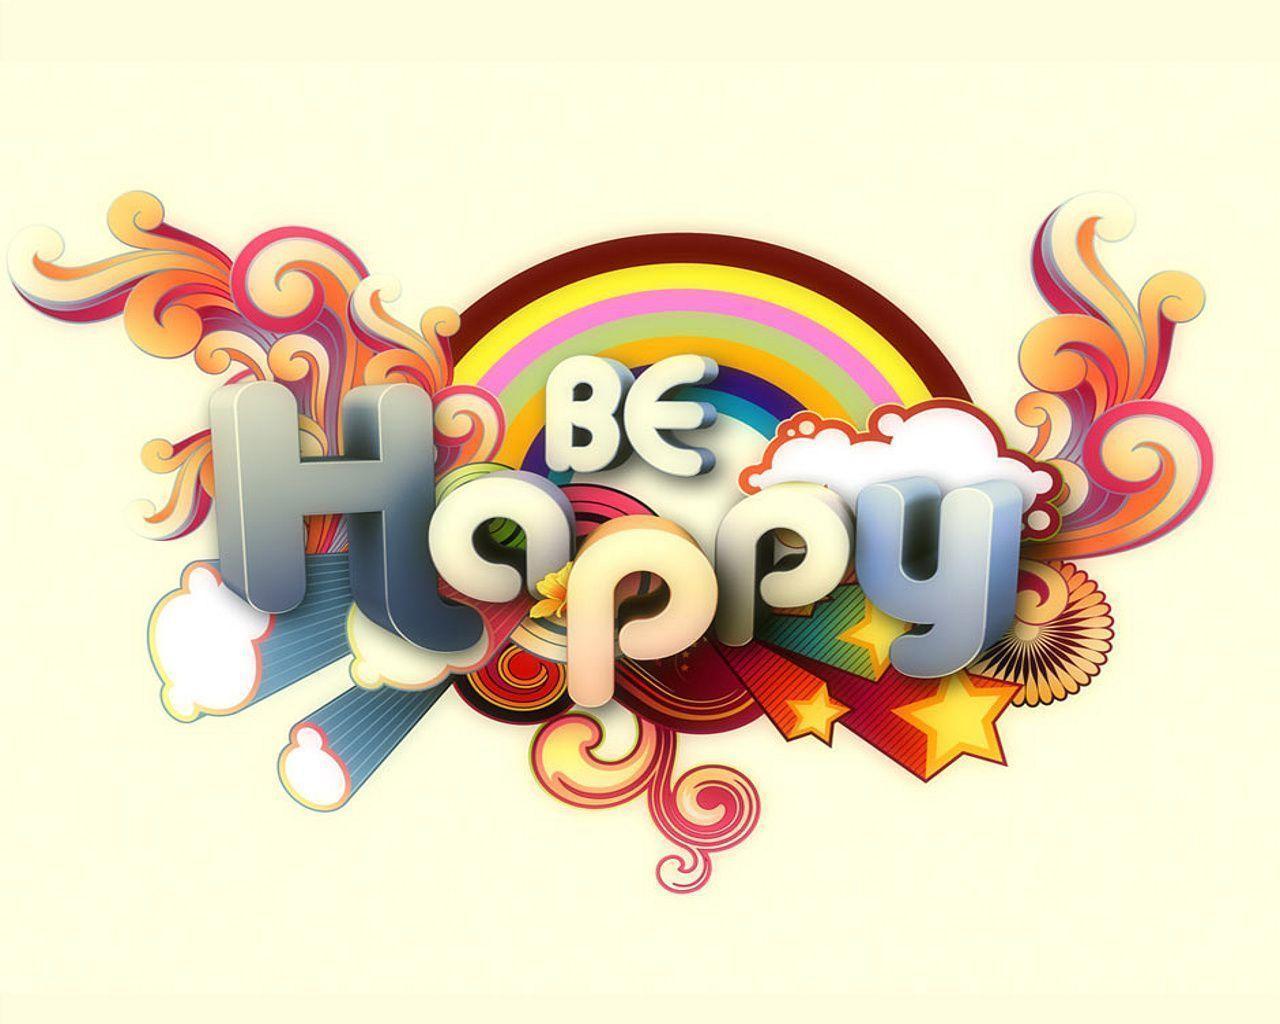 Be Happy Image. Free Download HD Wallpaper